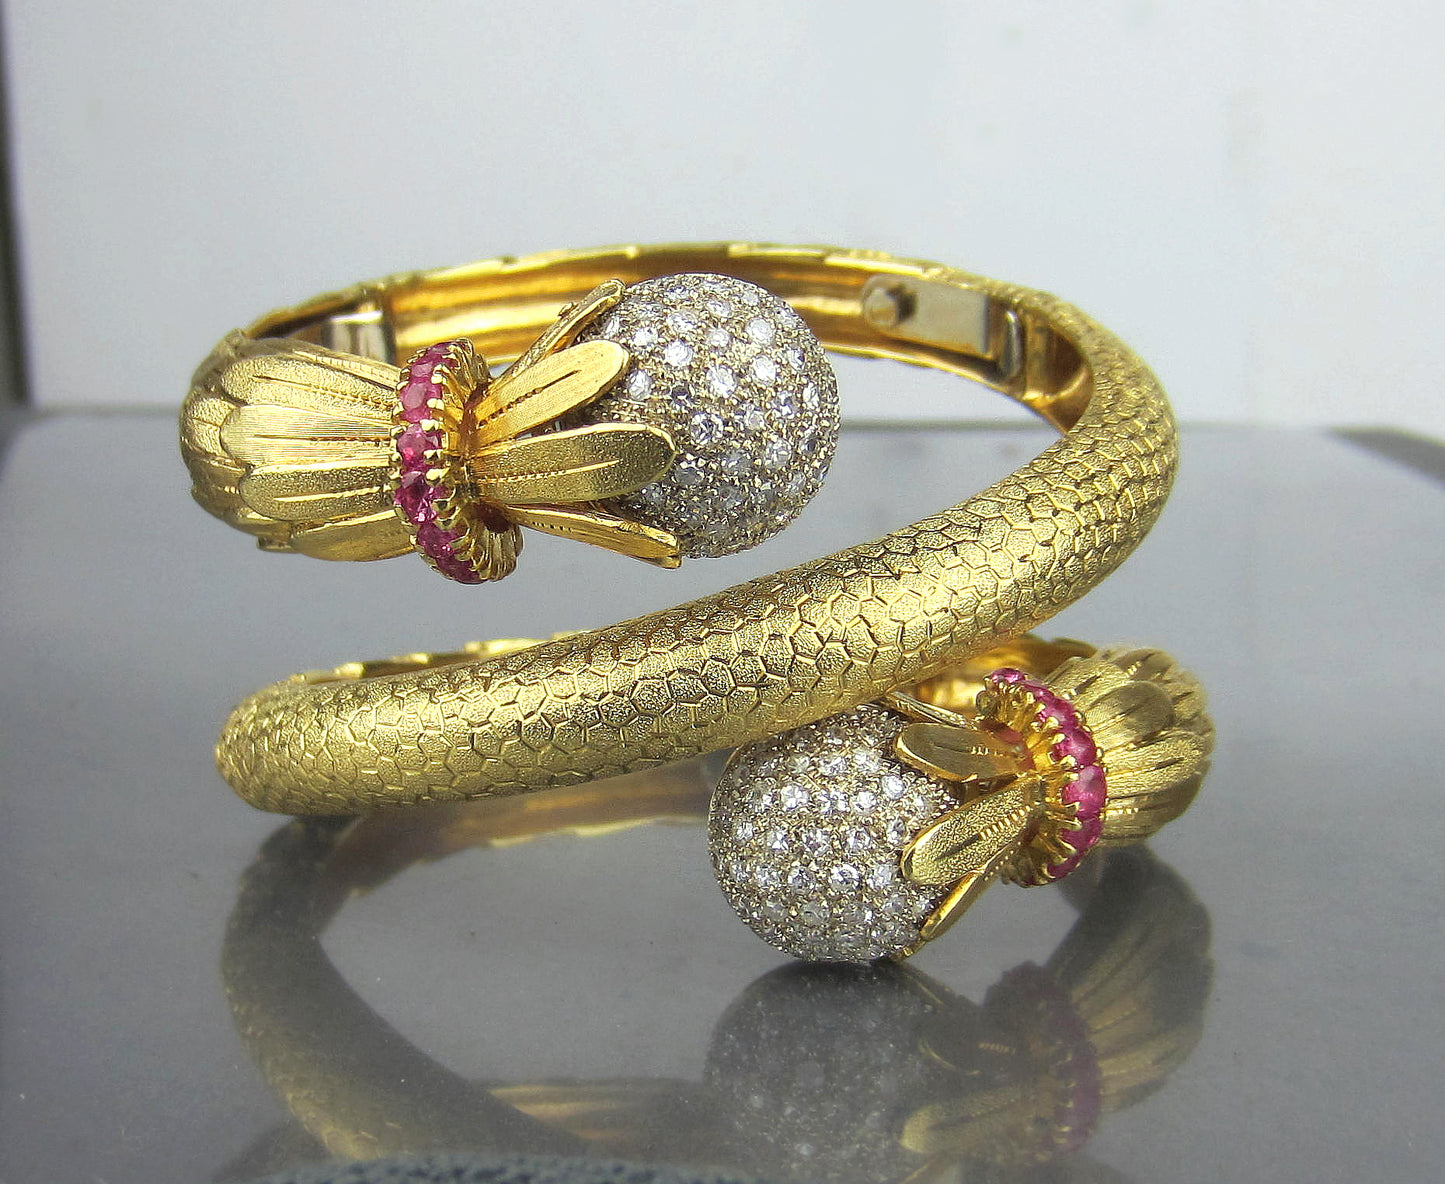 SOLD--Most Glamorous Mid-Century Diamond and Ruby Coil Bracelet 18k, Italy c. 1960